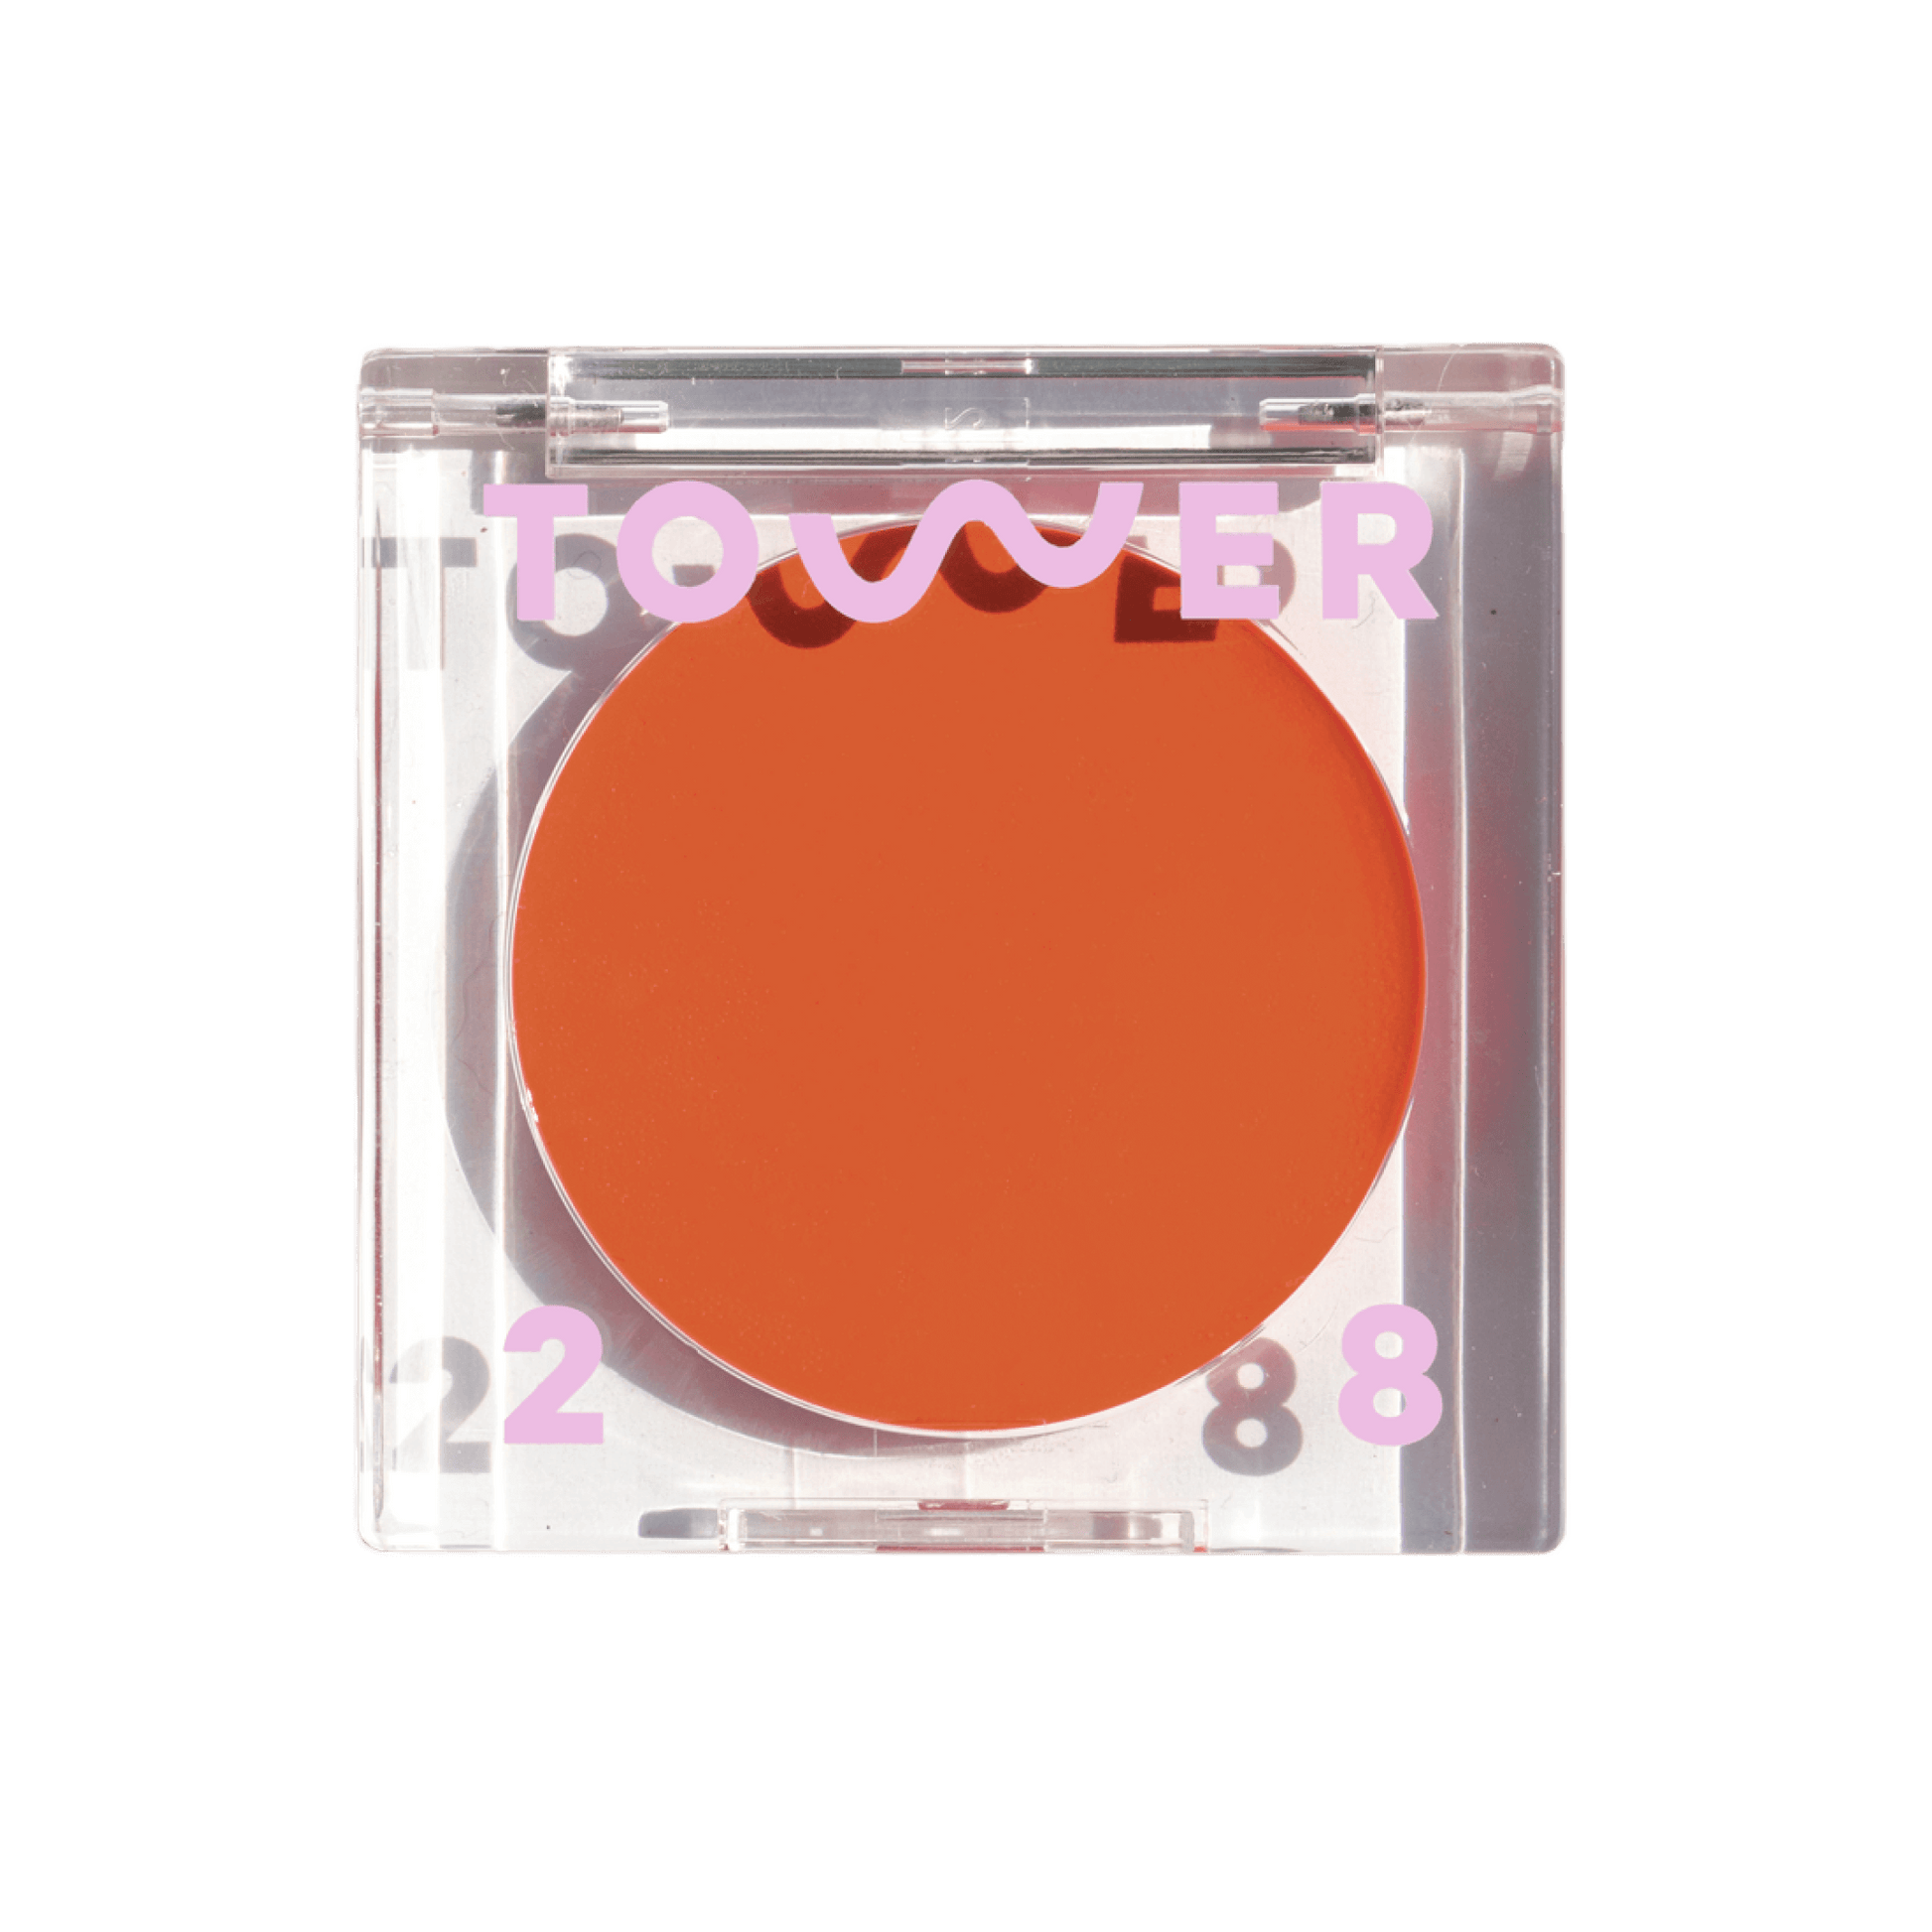 Tower 28 Beauty's BeachPlease Cream Blush in the shade Golden Hour